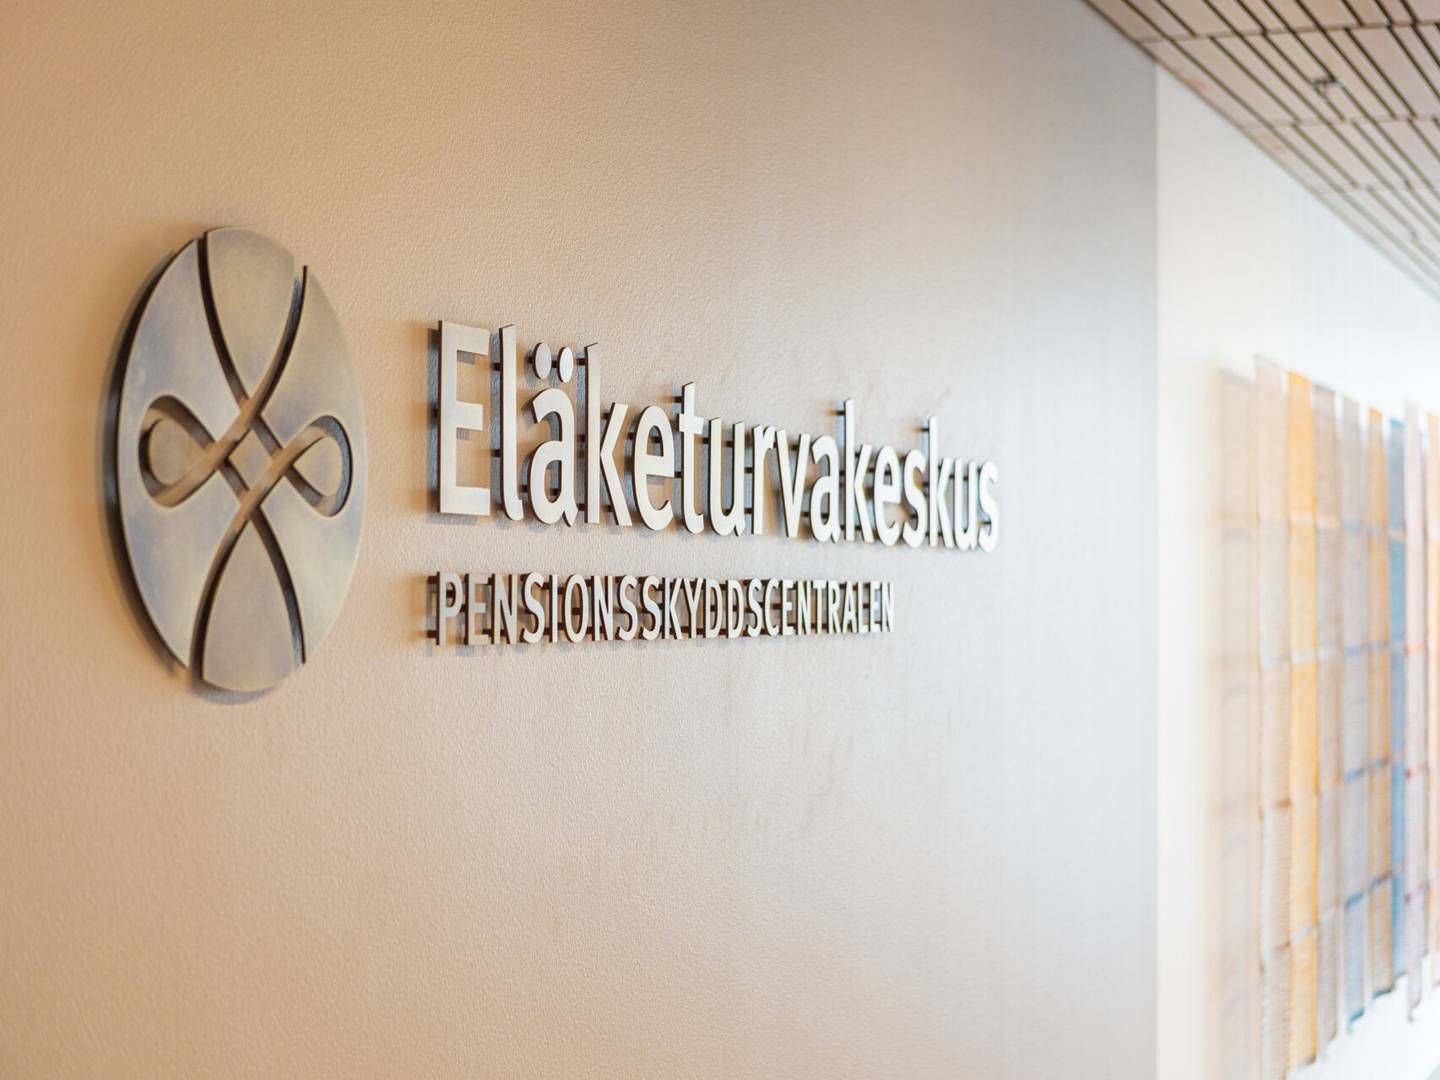 The Finnish earnings-related pension system lost EUR 16bn in 2022 | Photo: Vesa Laitinen / PR